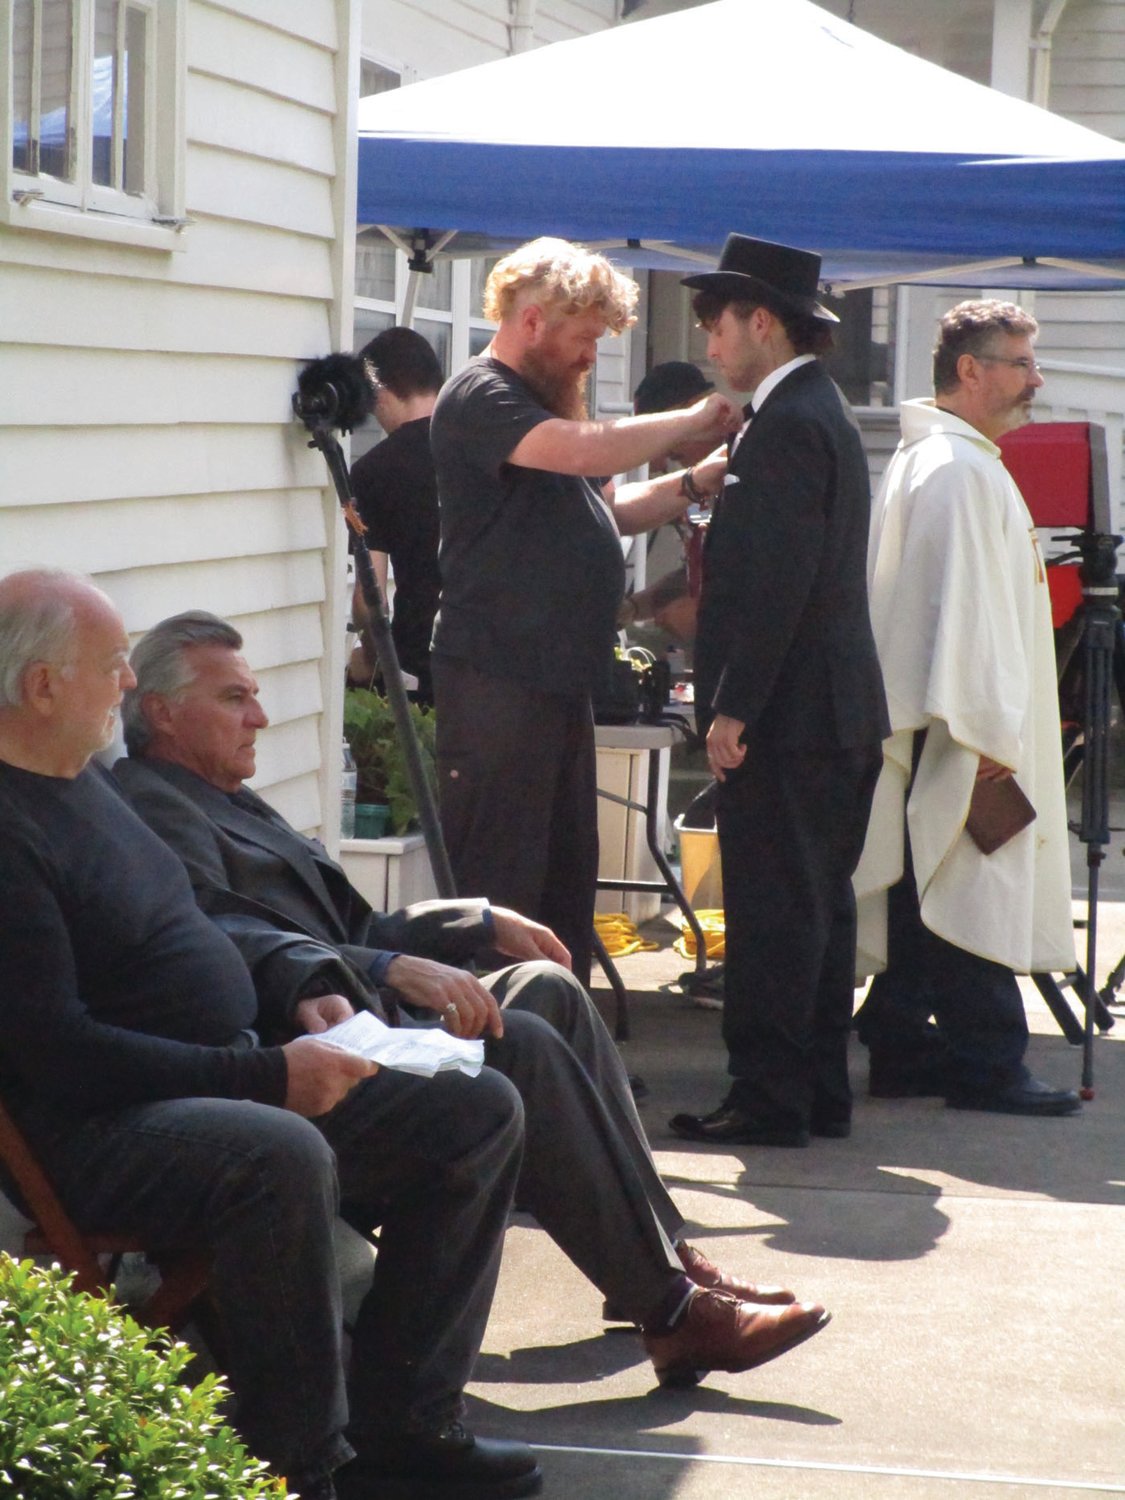 MIC ON: Adam Carbone, pictured in the top hat, is fitting with a microphone before the start of filming on Saturday at Sprague Mansion.